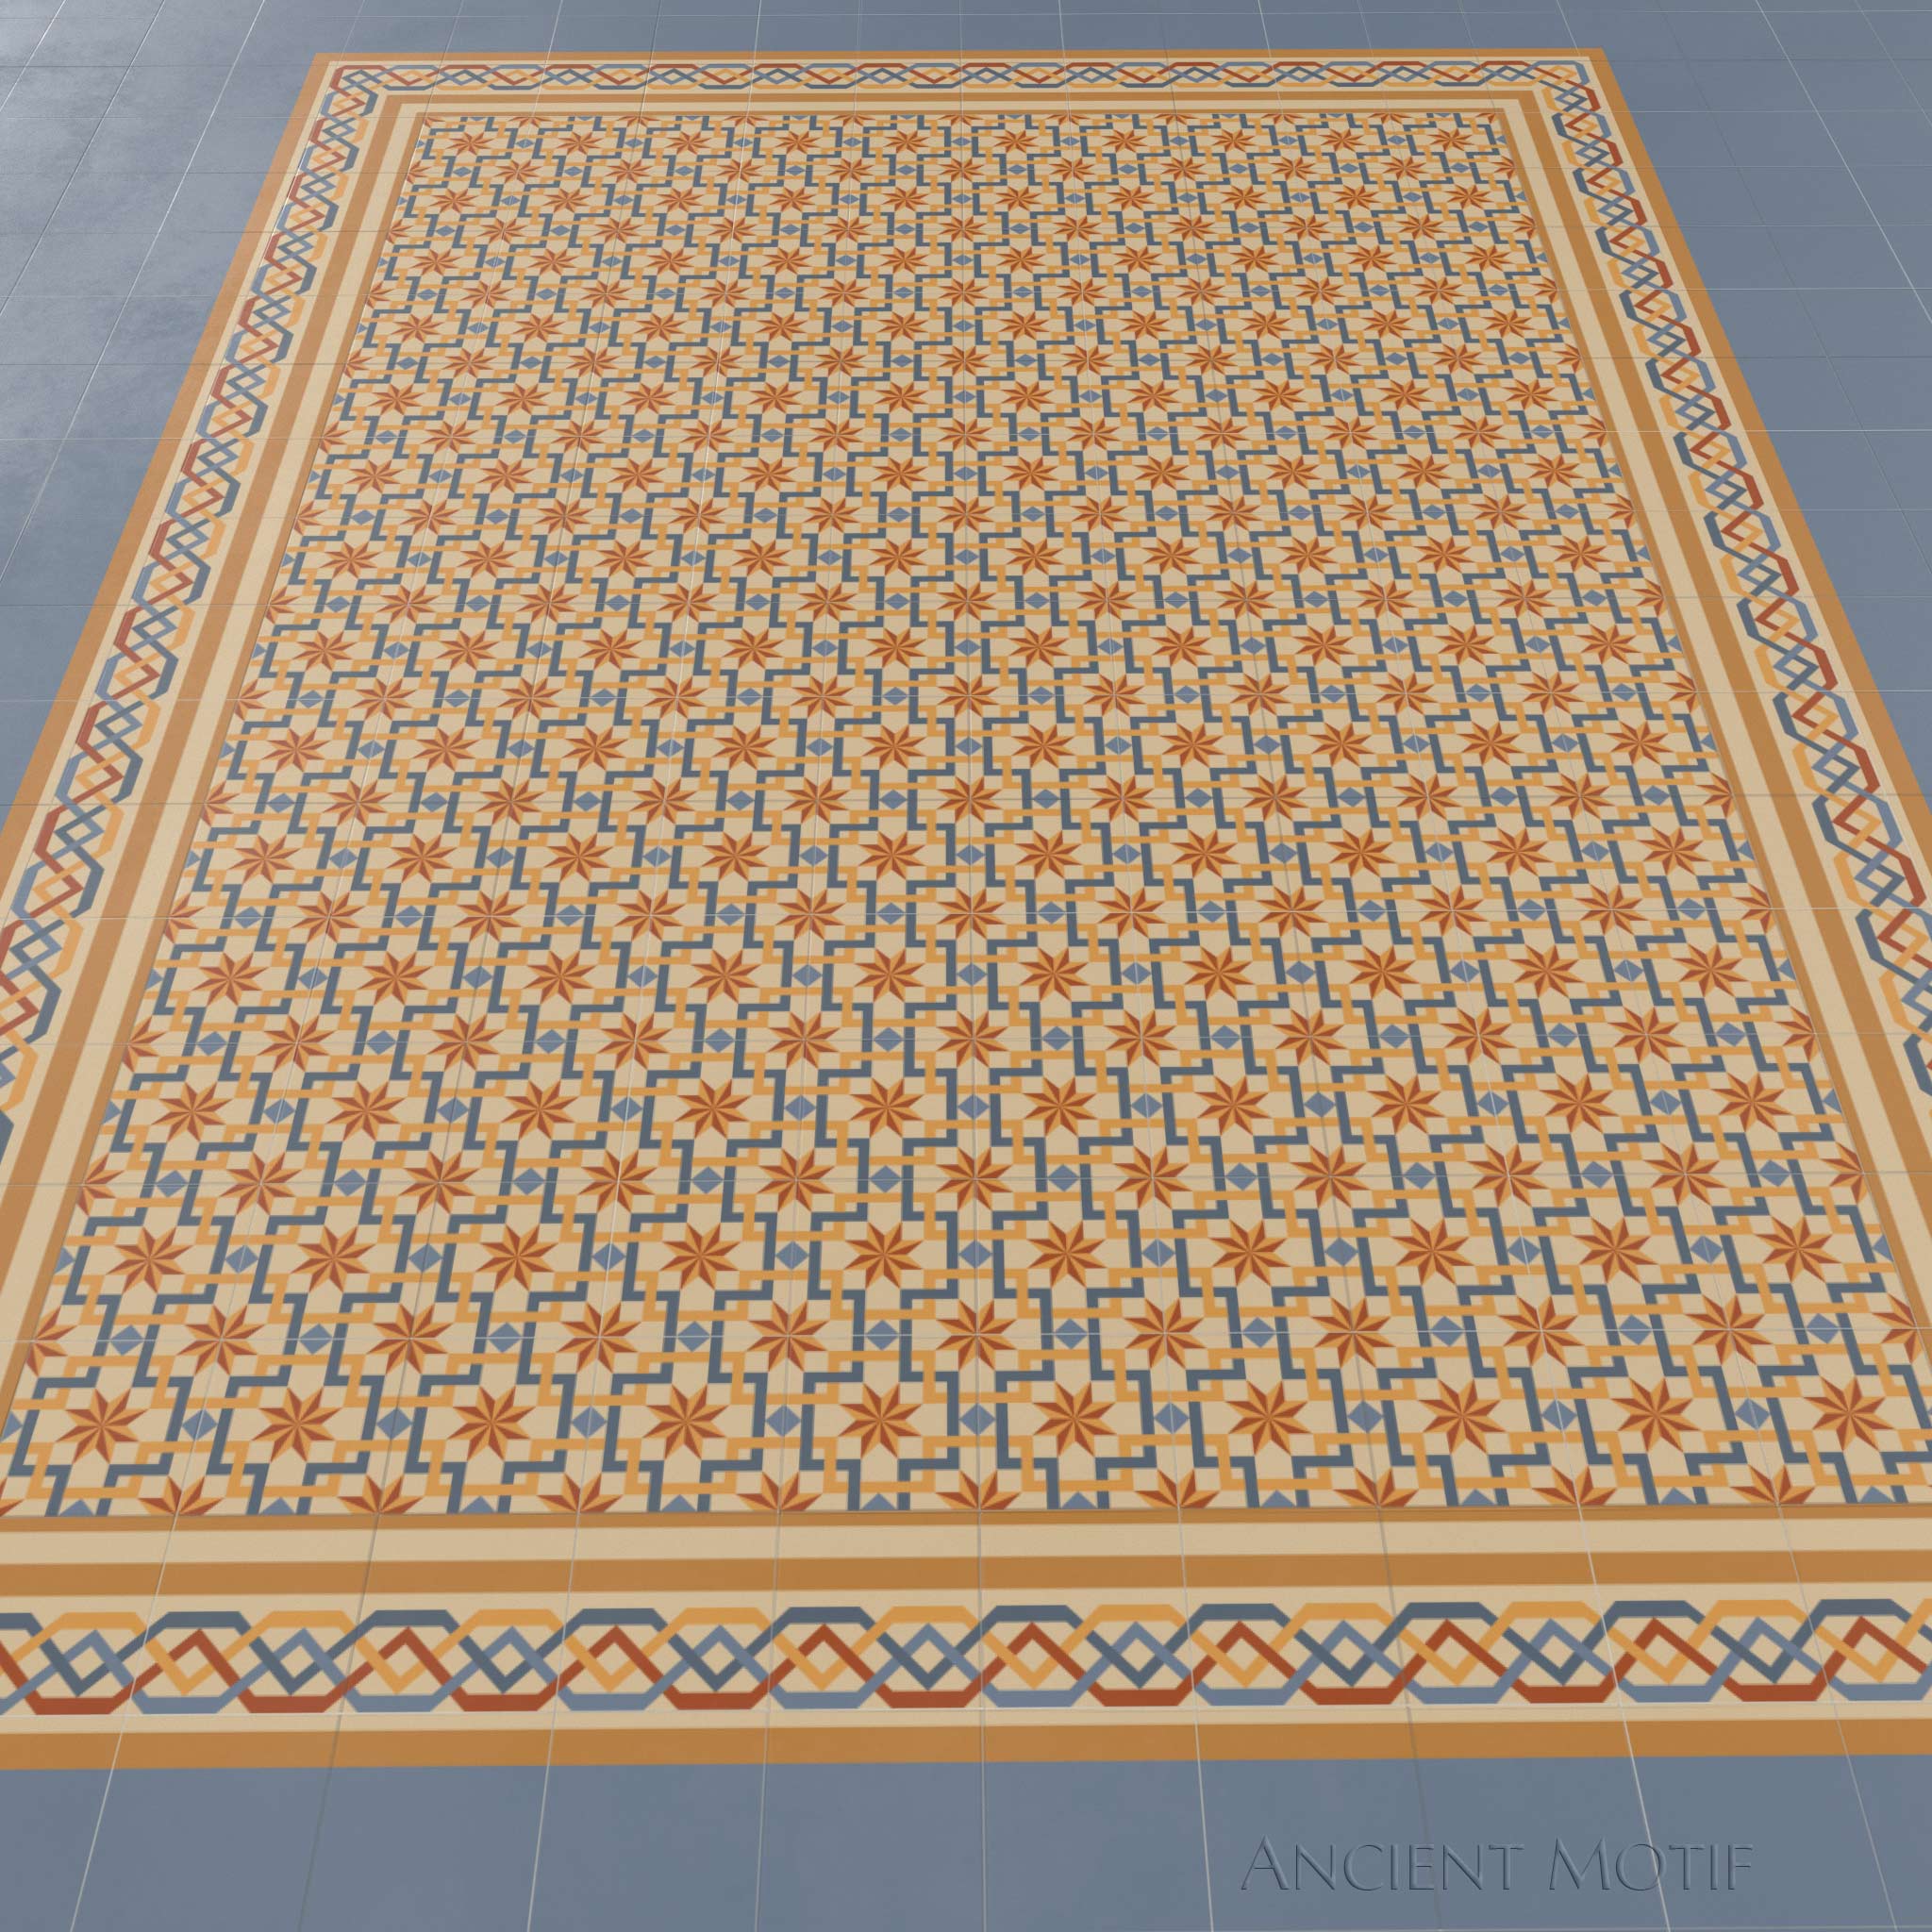 Andalusia Encasutic Cement Tile in Cornflower, Ginger and Apricot